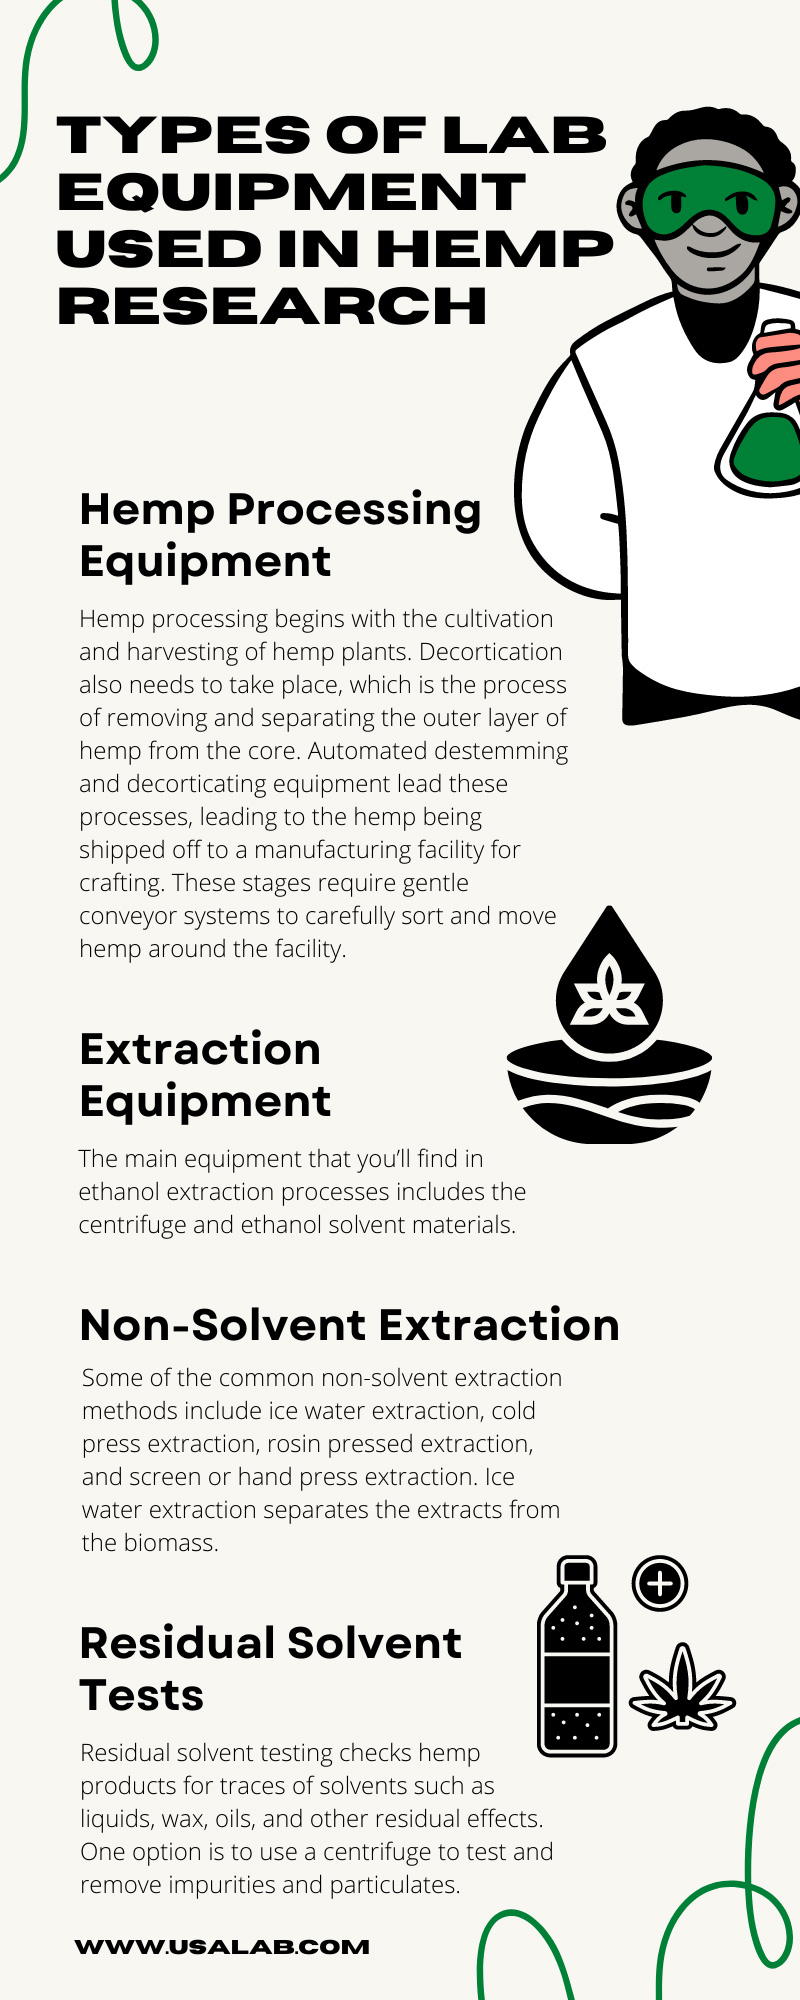 Types of Lab Equipment Used in Hemp Research